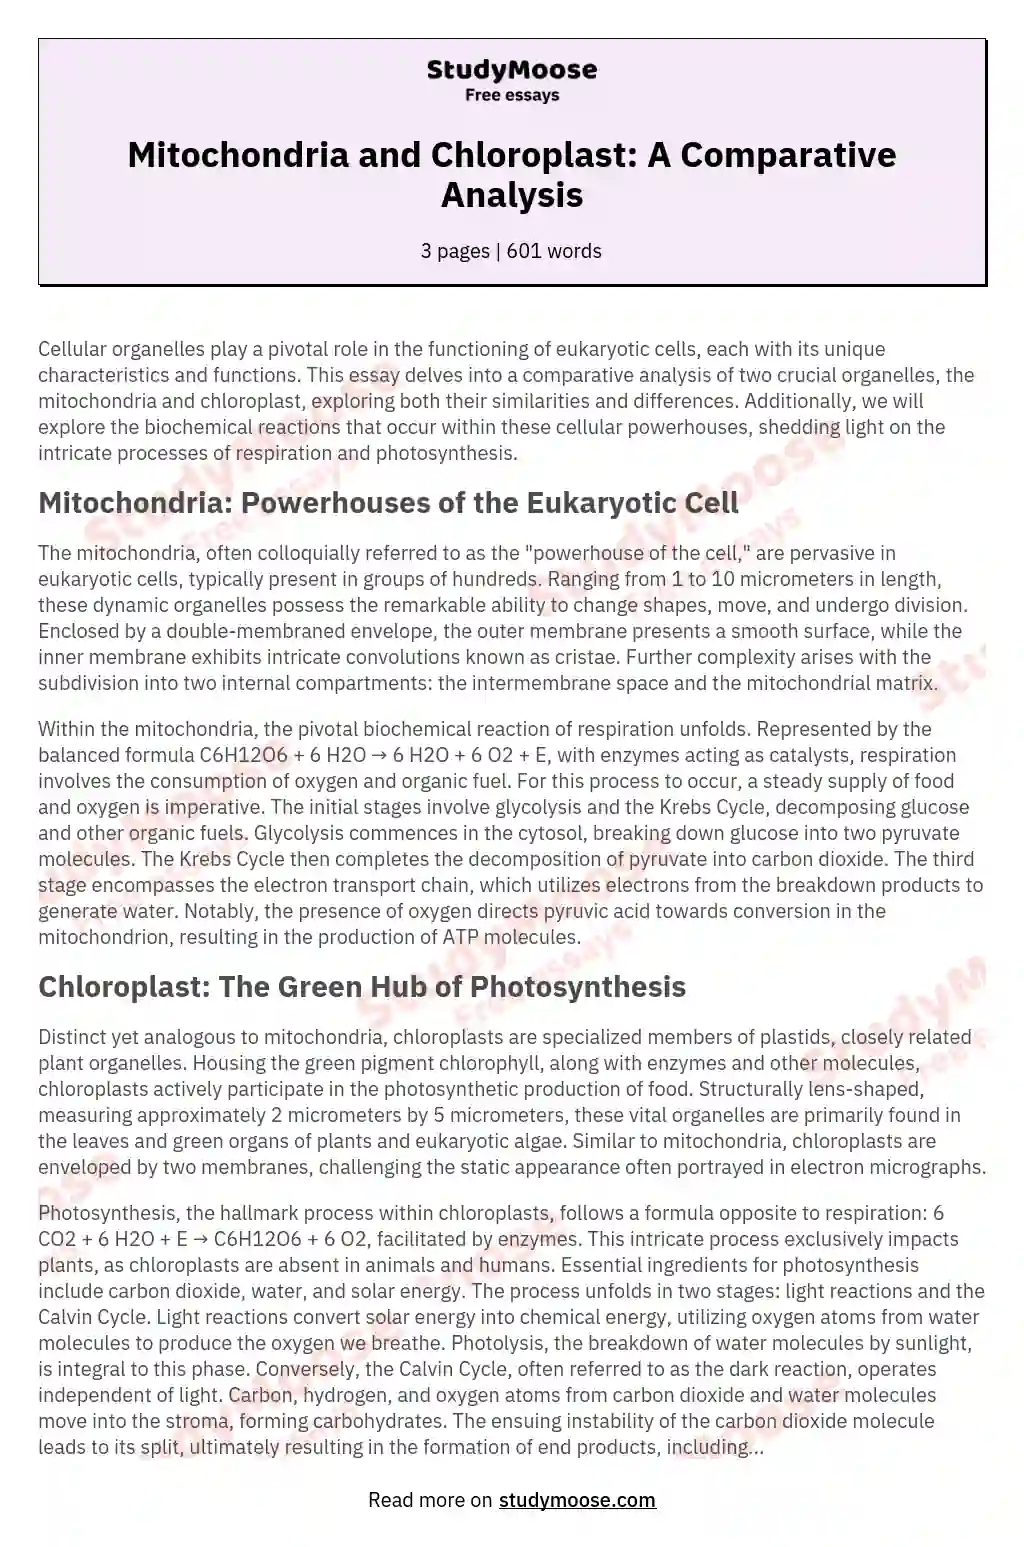 Mitochondria and Chloroplast: A Comparative Analysis essay